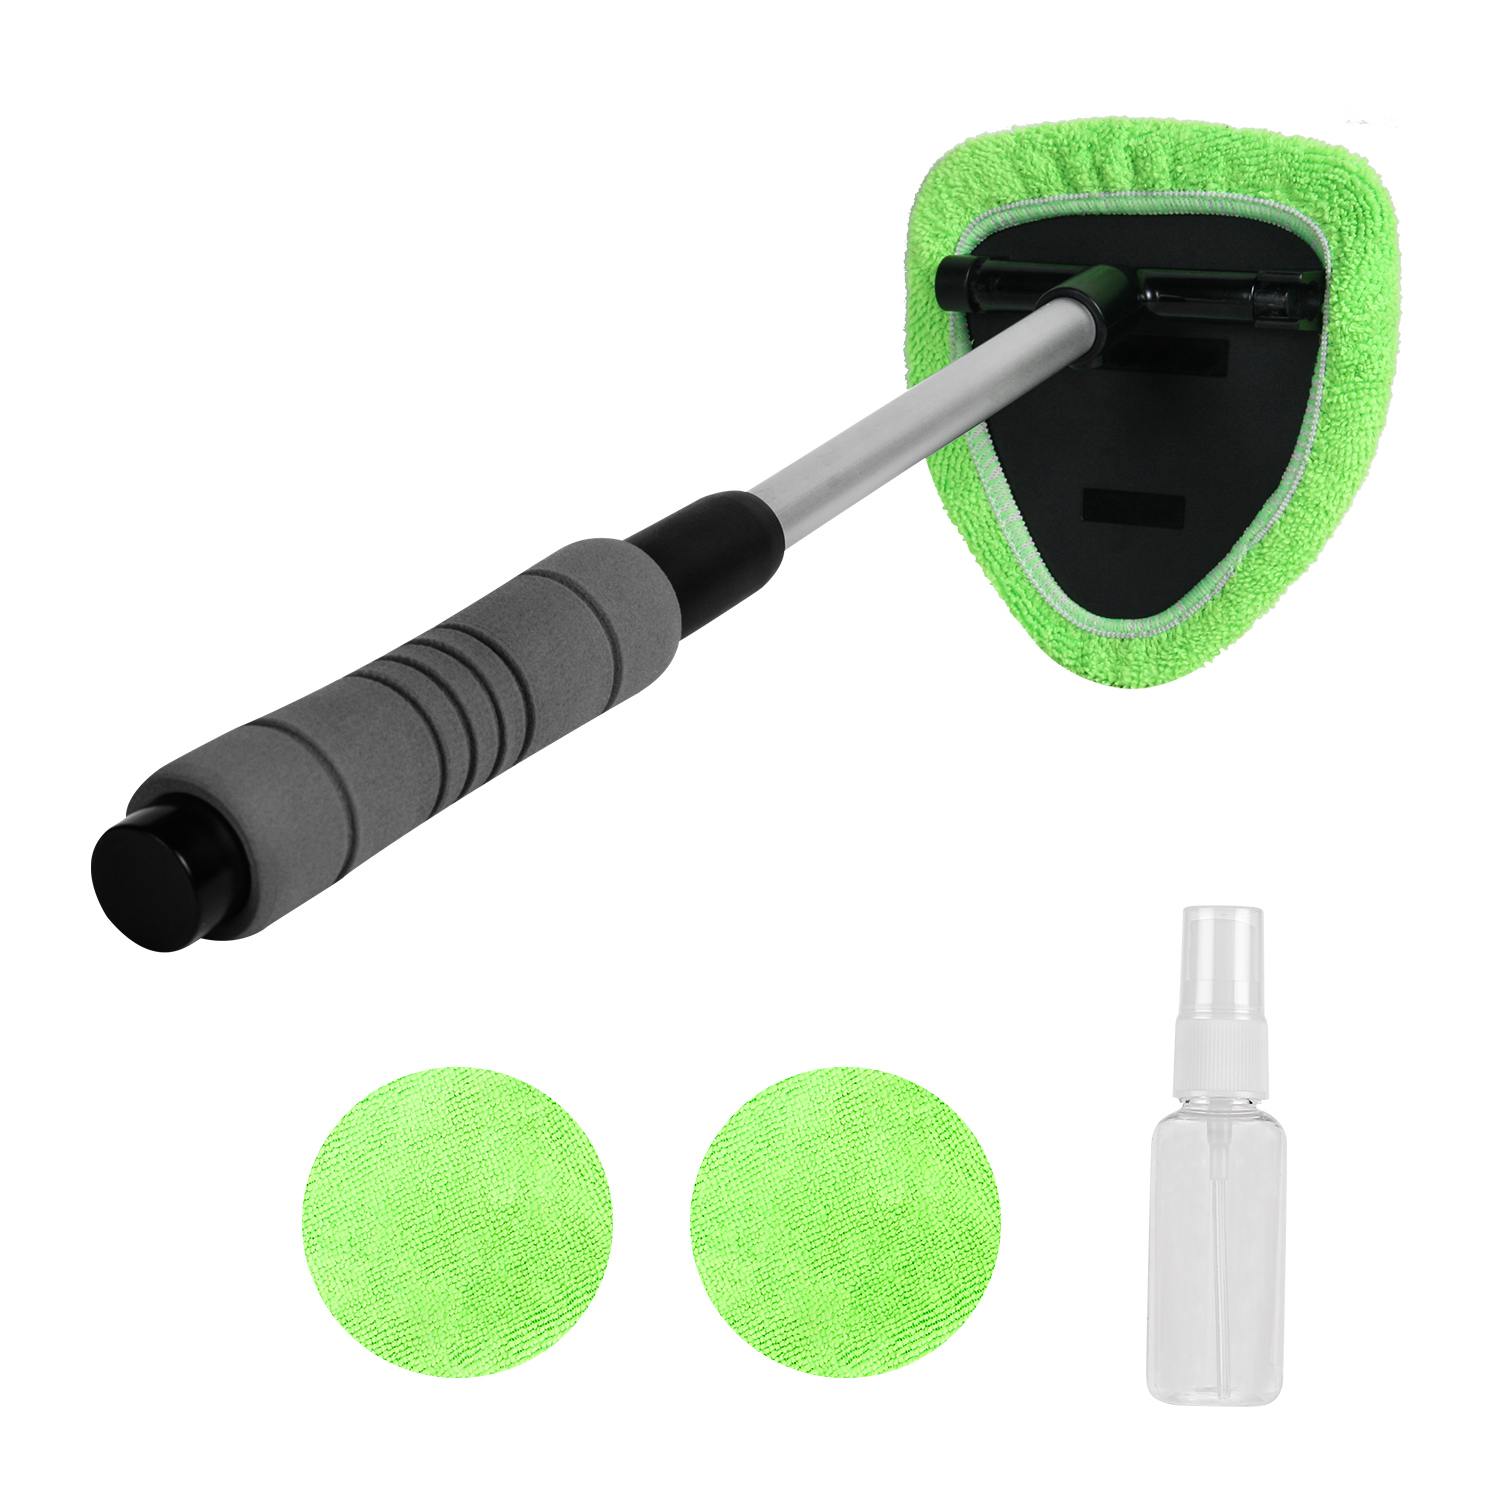 Green 2 Sets Windshield Cleaner Car Window Cleaner Car Window Cleaning Tool Glass Cleaner Wiper with Detachable Handle Microfiber Pads and Spray Bottle Car Cleanser Brush Car Cleaning Kit 